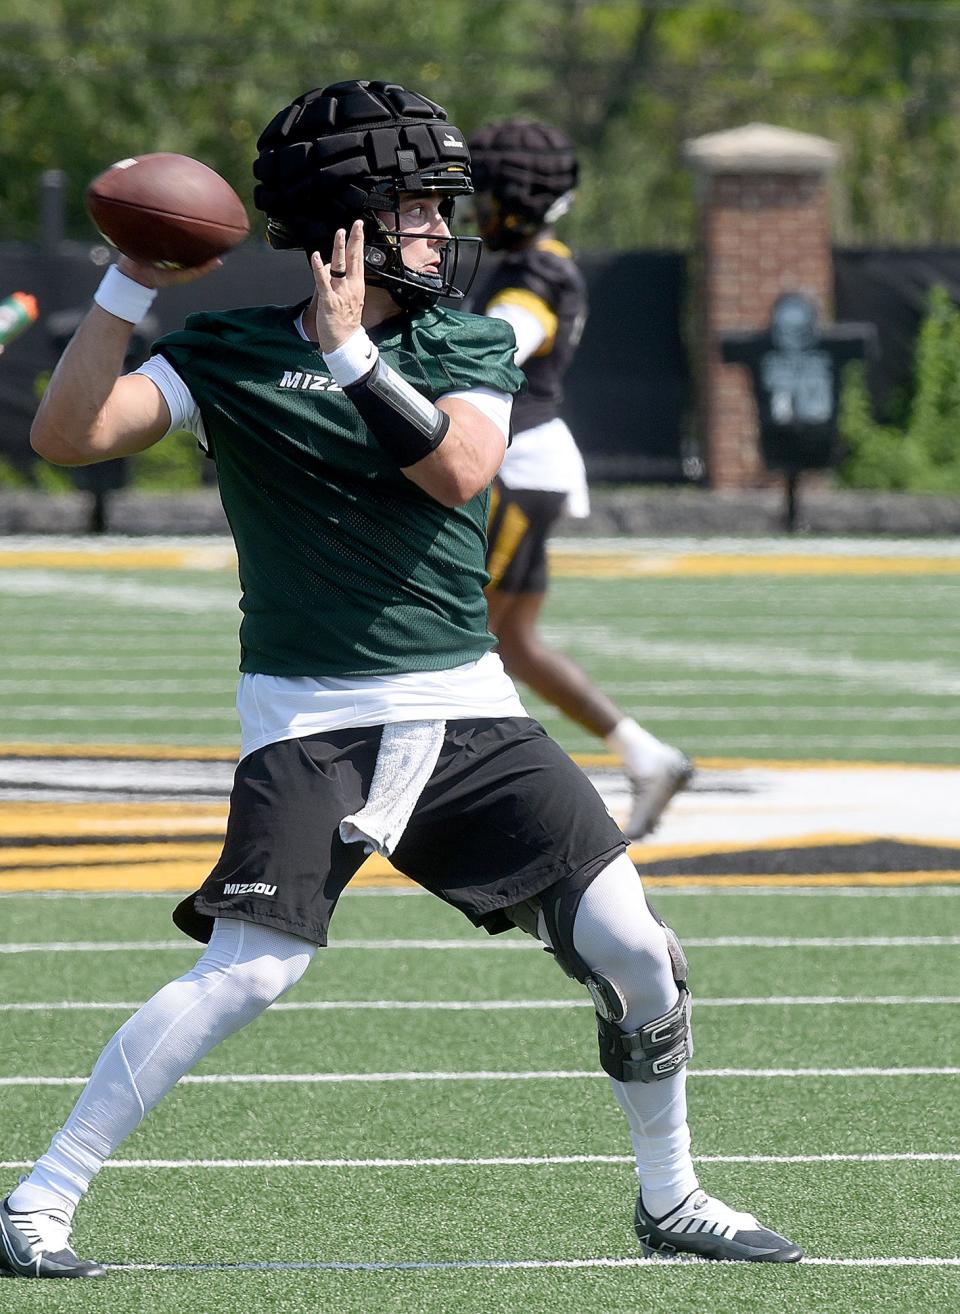 Missouri quarterback Jack Abraham prepares to throw a pass during the first practice of the 2022 season at the Kadlec Practice Fields